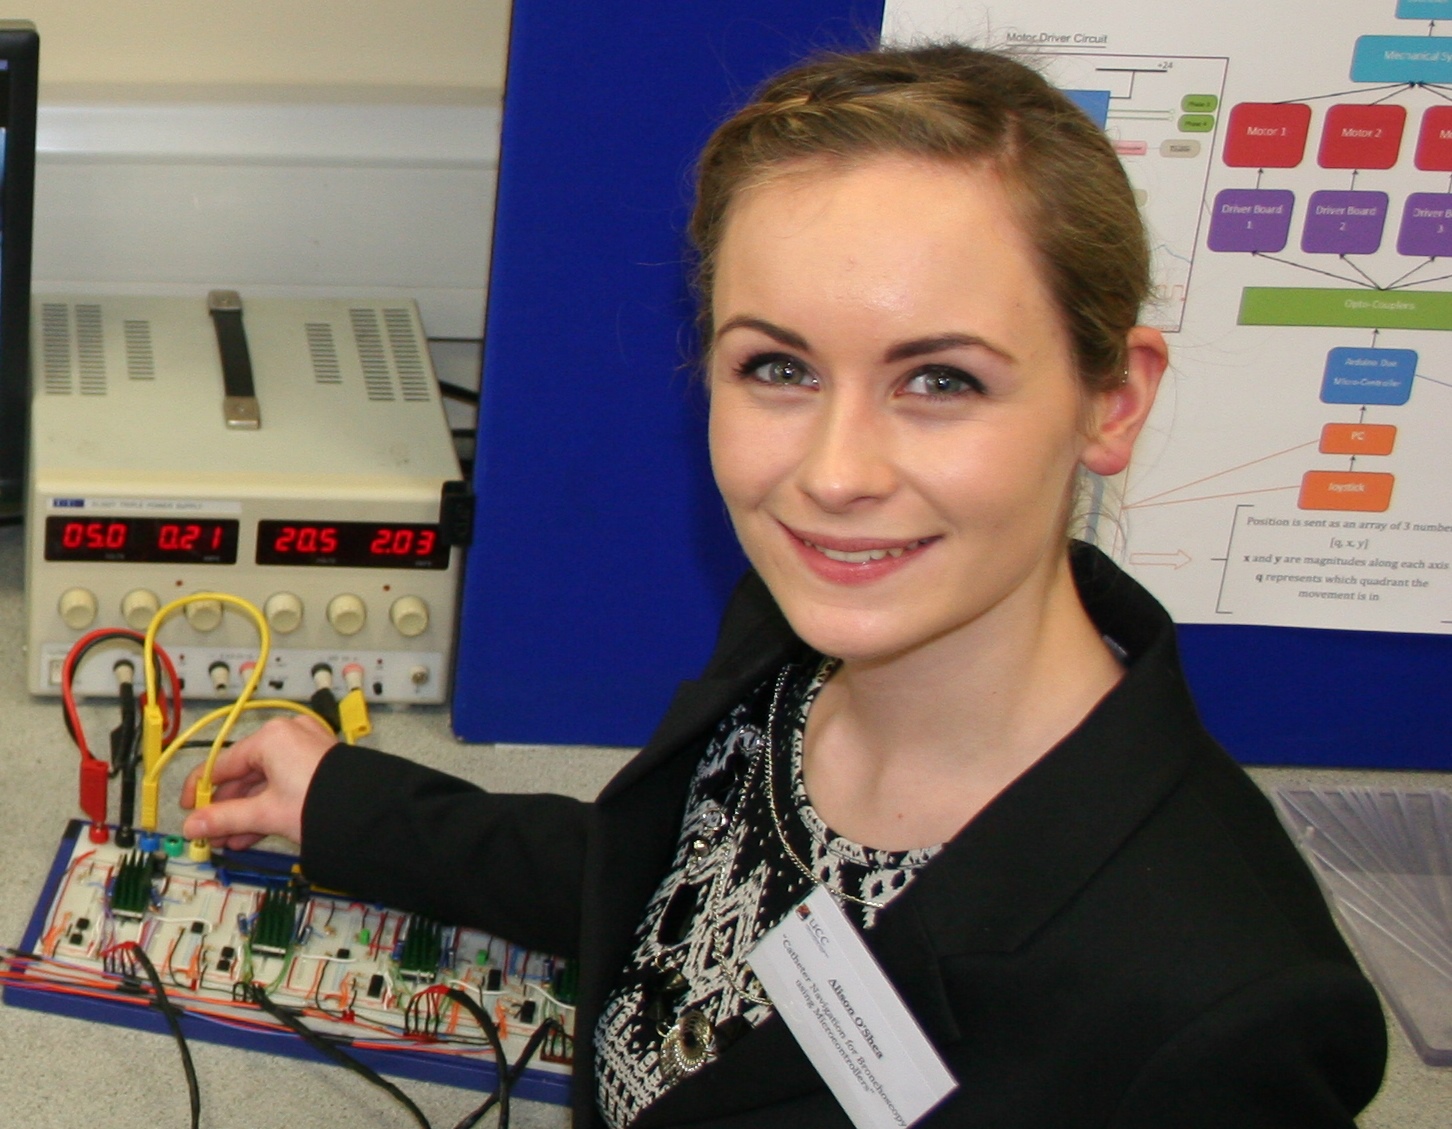 Alison O’Shea final year Electrical Engineering student wins a 2014 The Naughton Fellowship awards 